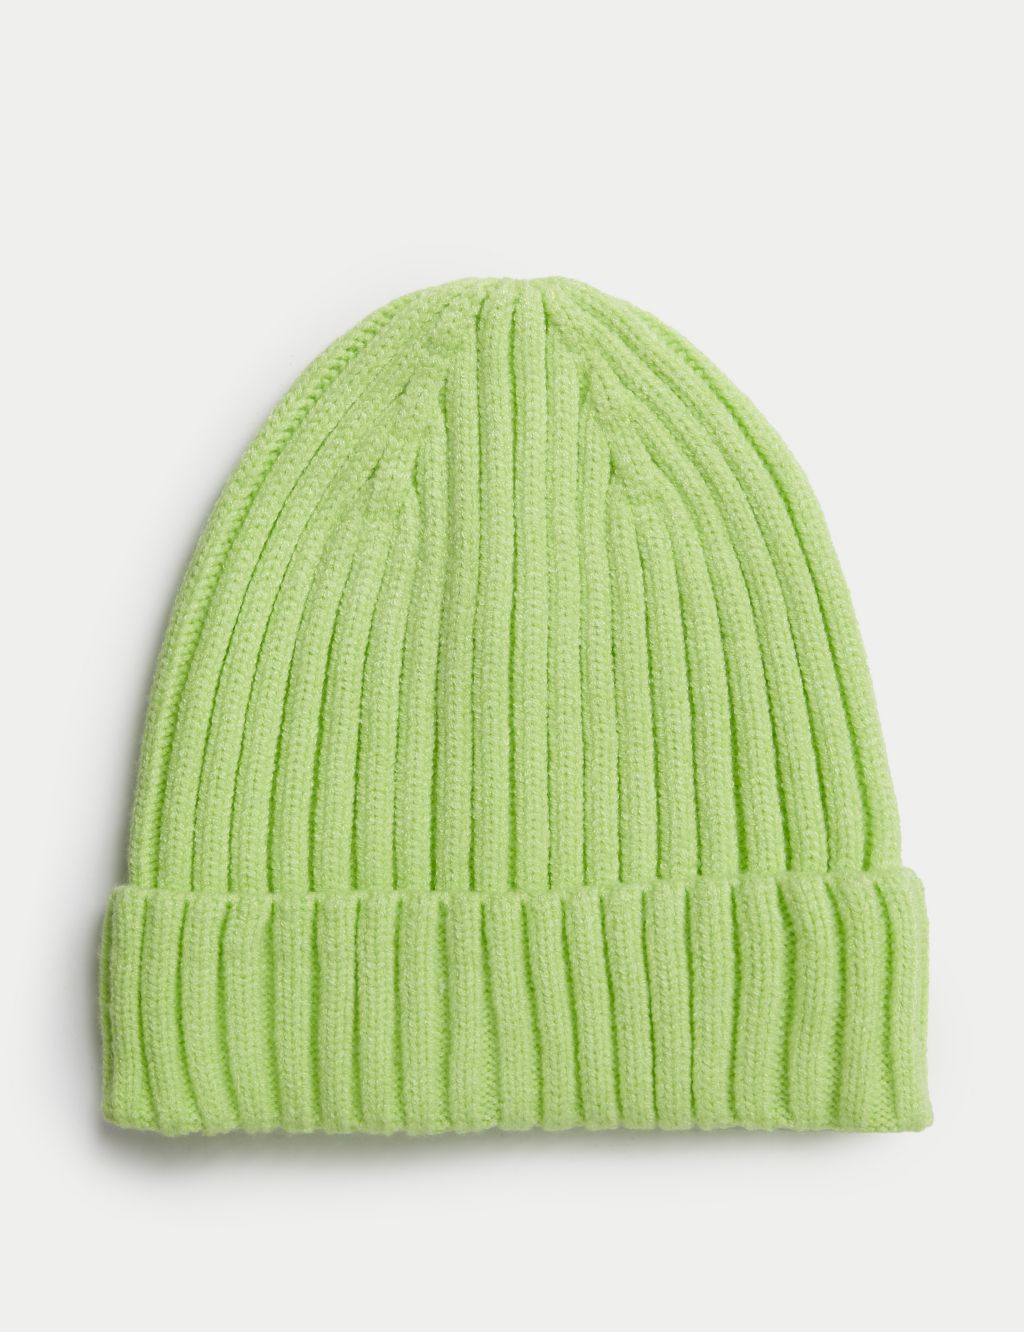 Kids' Knitted Beanie Hat (1- 13 Yrs) image 1